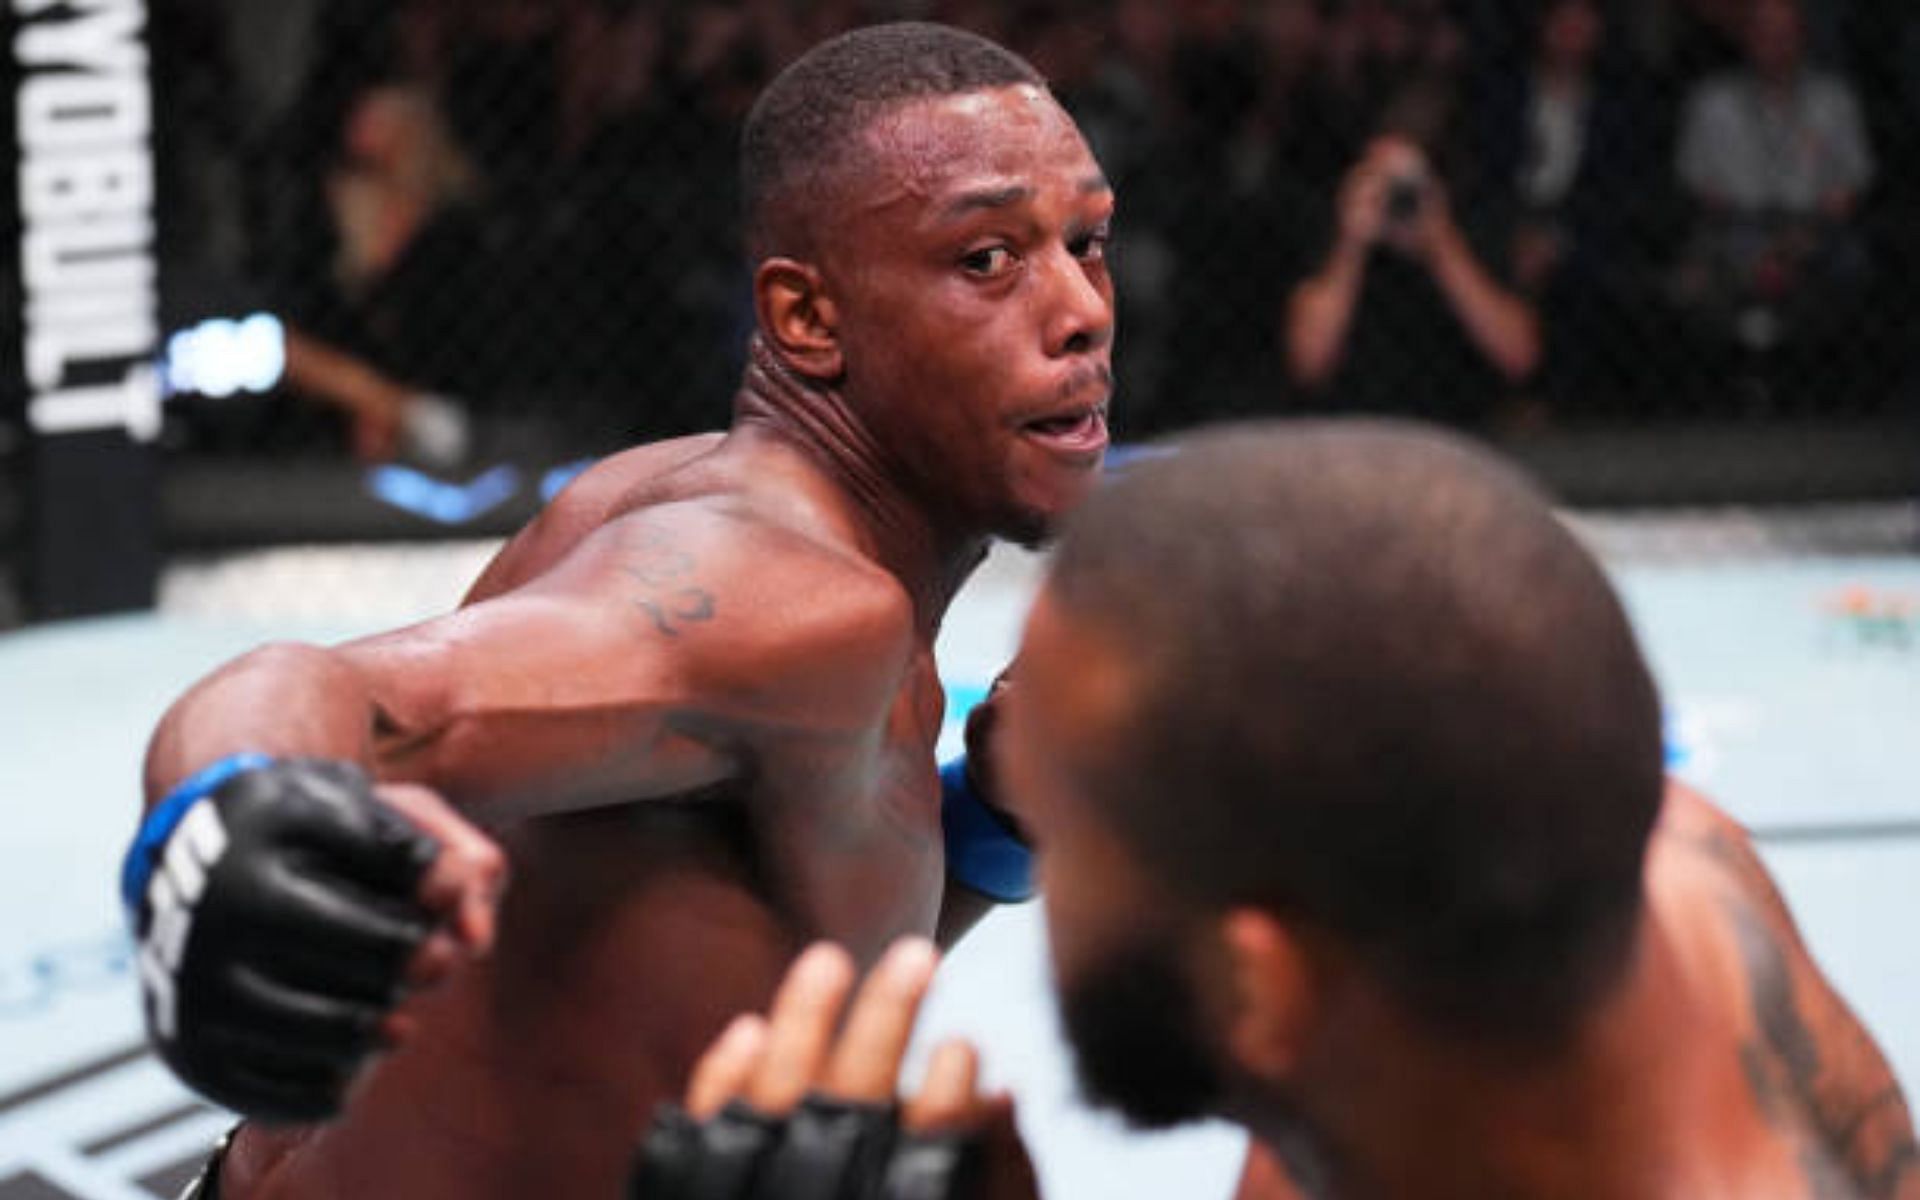 Jamahal Hill ranked among top strikers in the UFC according to interesting statistic